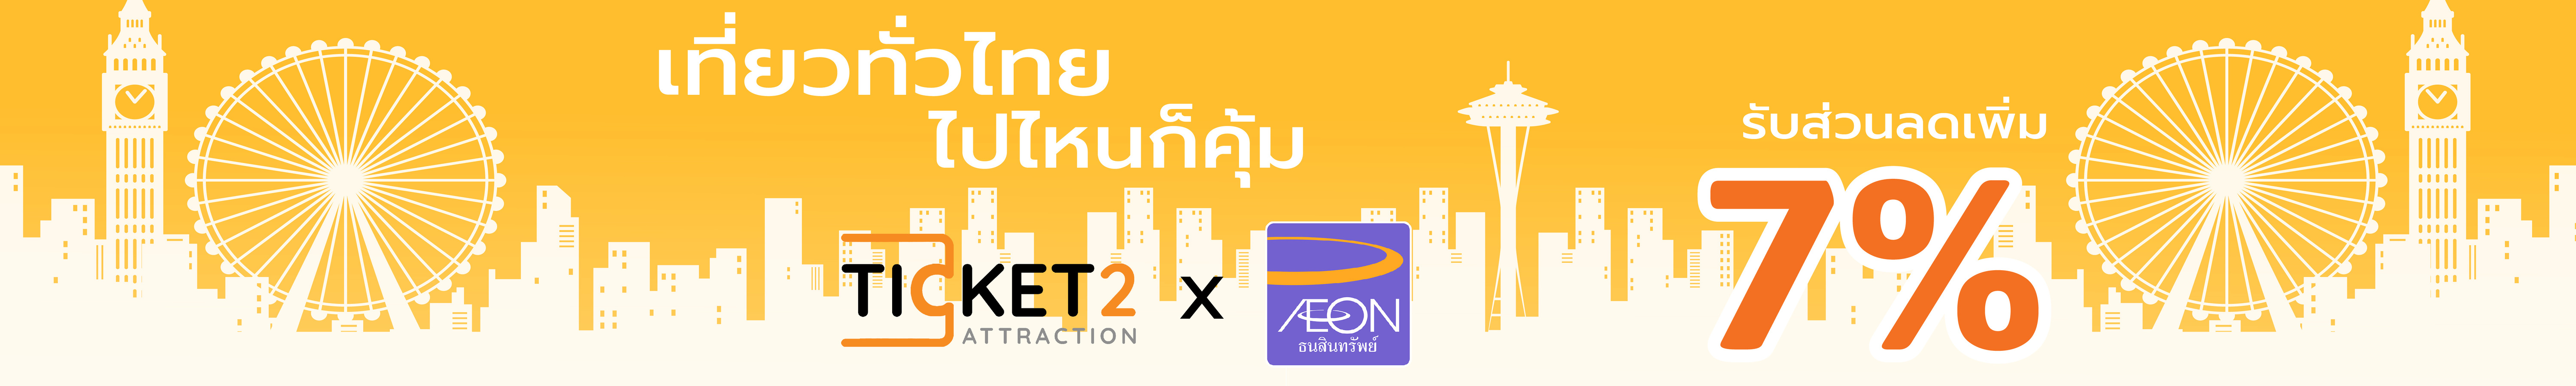 Get 7% discount for purchase ticket with AEON credit card - Ticket2Attraction